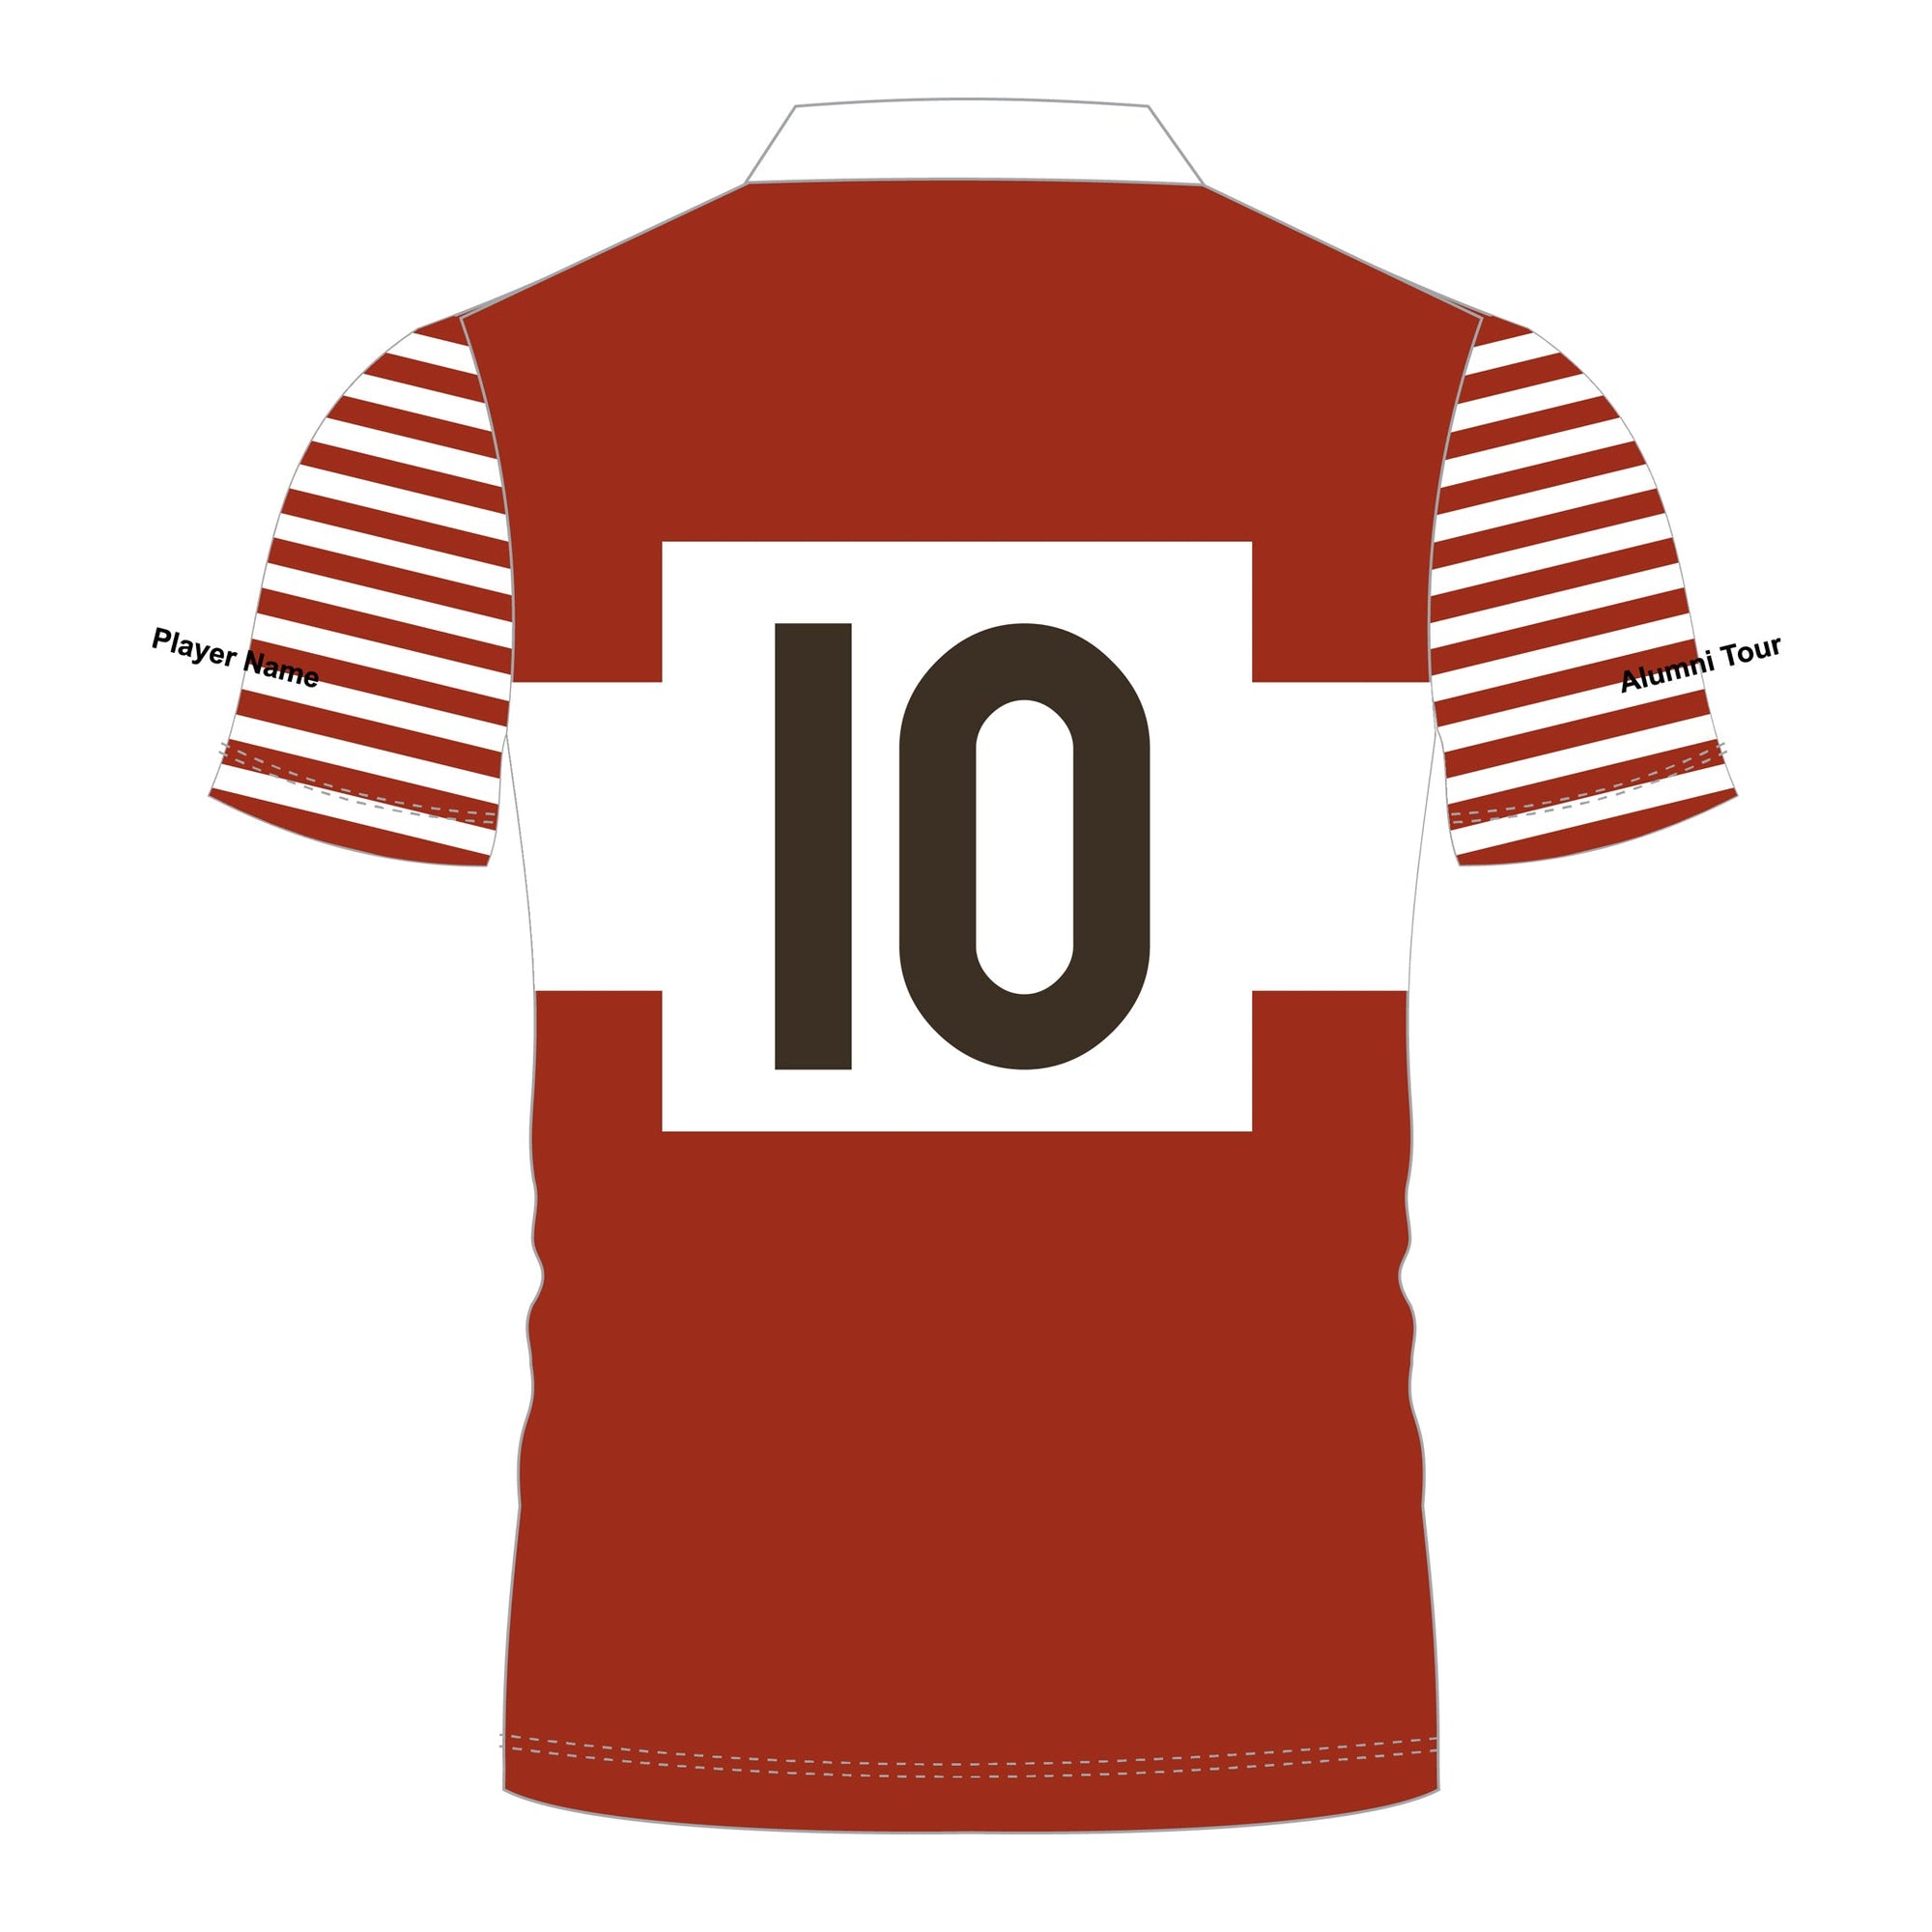 Rugby Imports Stanford RWC Alumni Tour Jersey